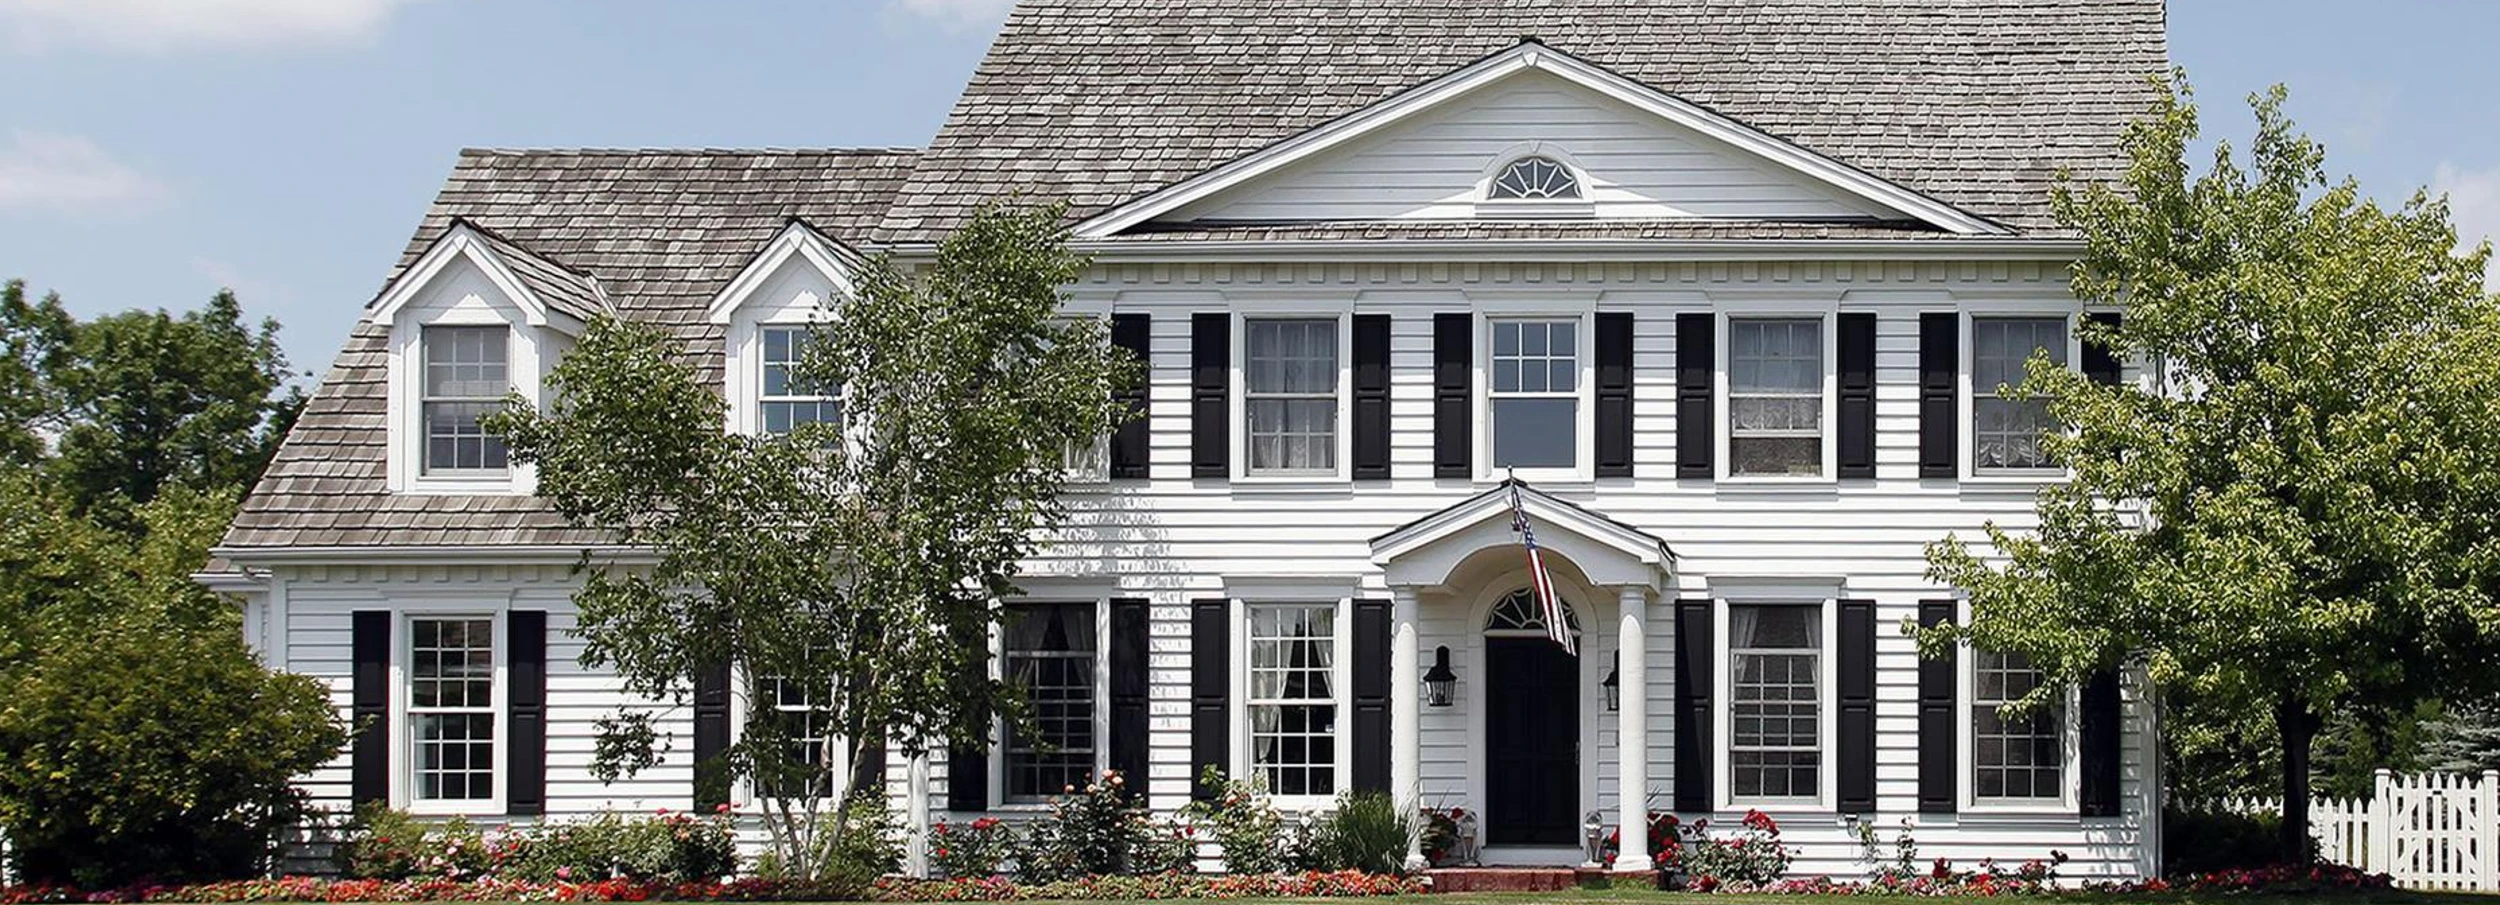 white, two story colonial home